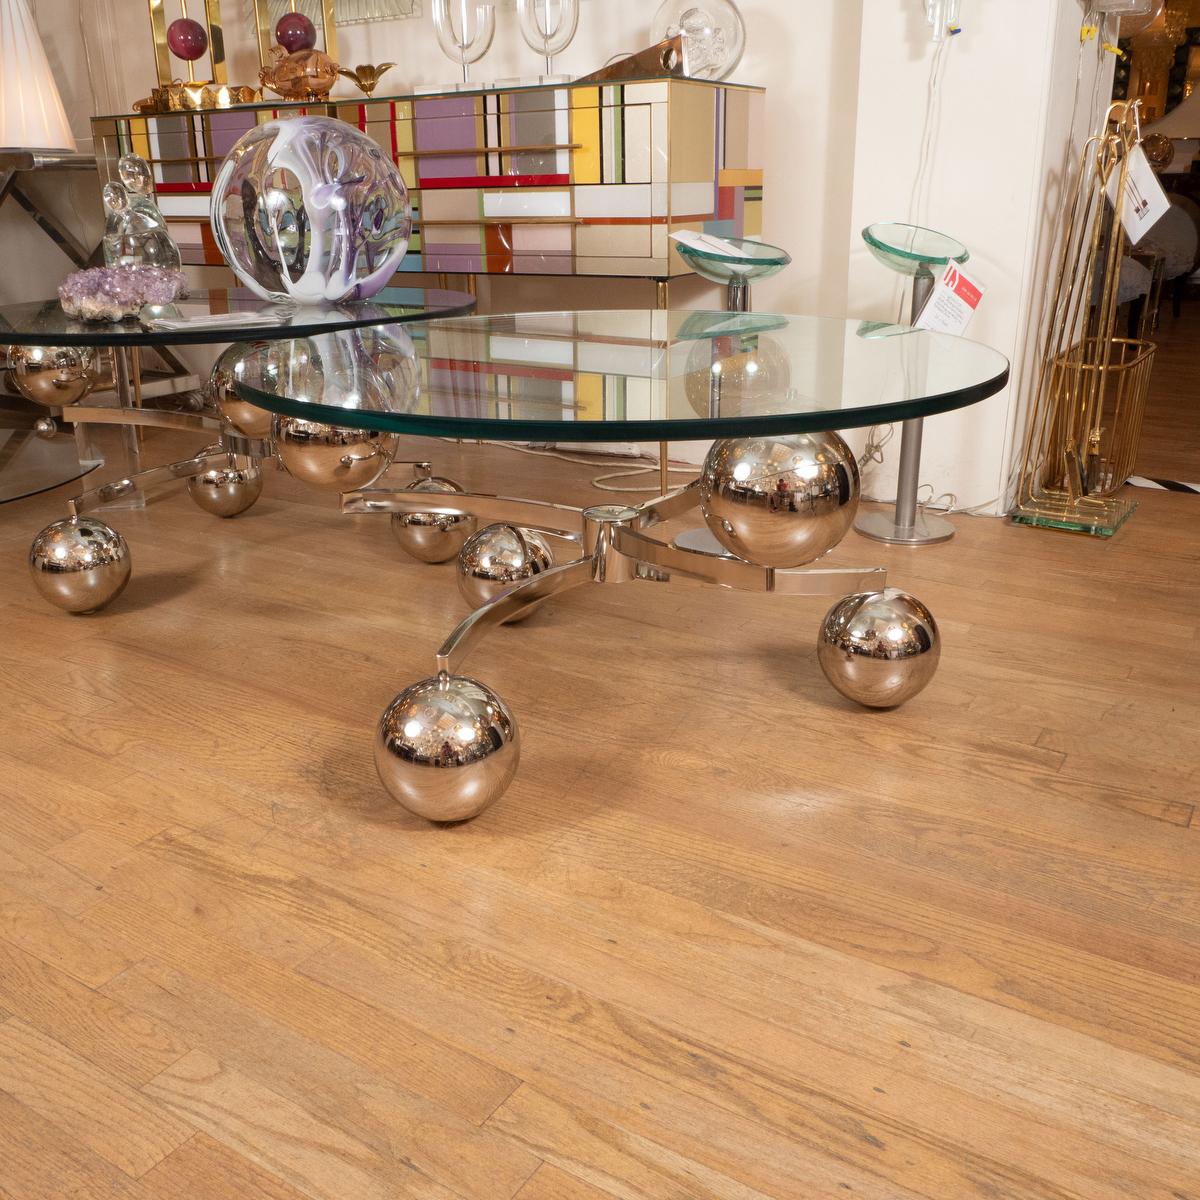 Circular coffee table with nickel base featuring ball form elements and glass top. 